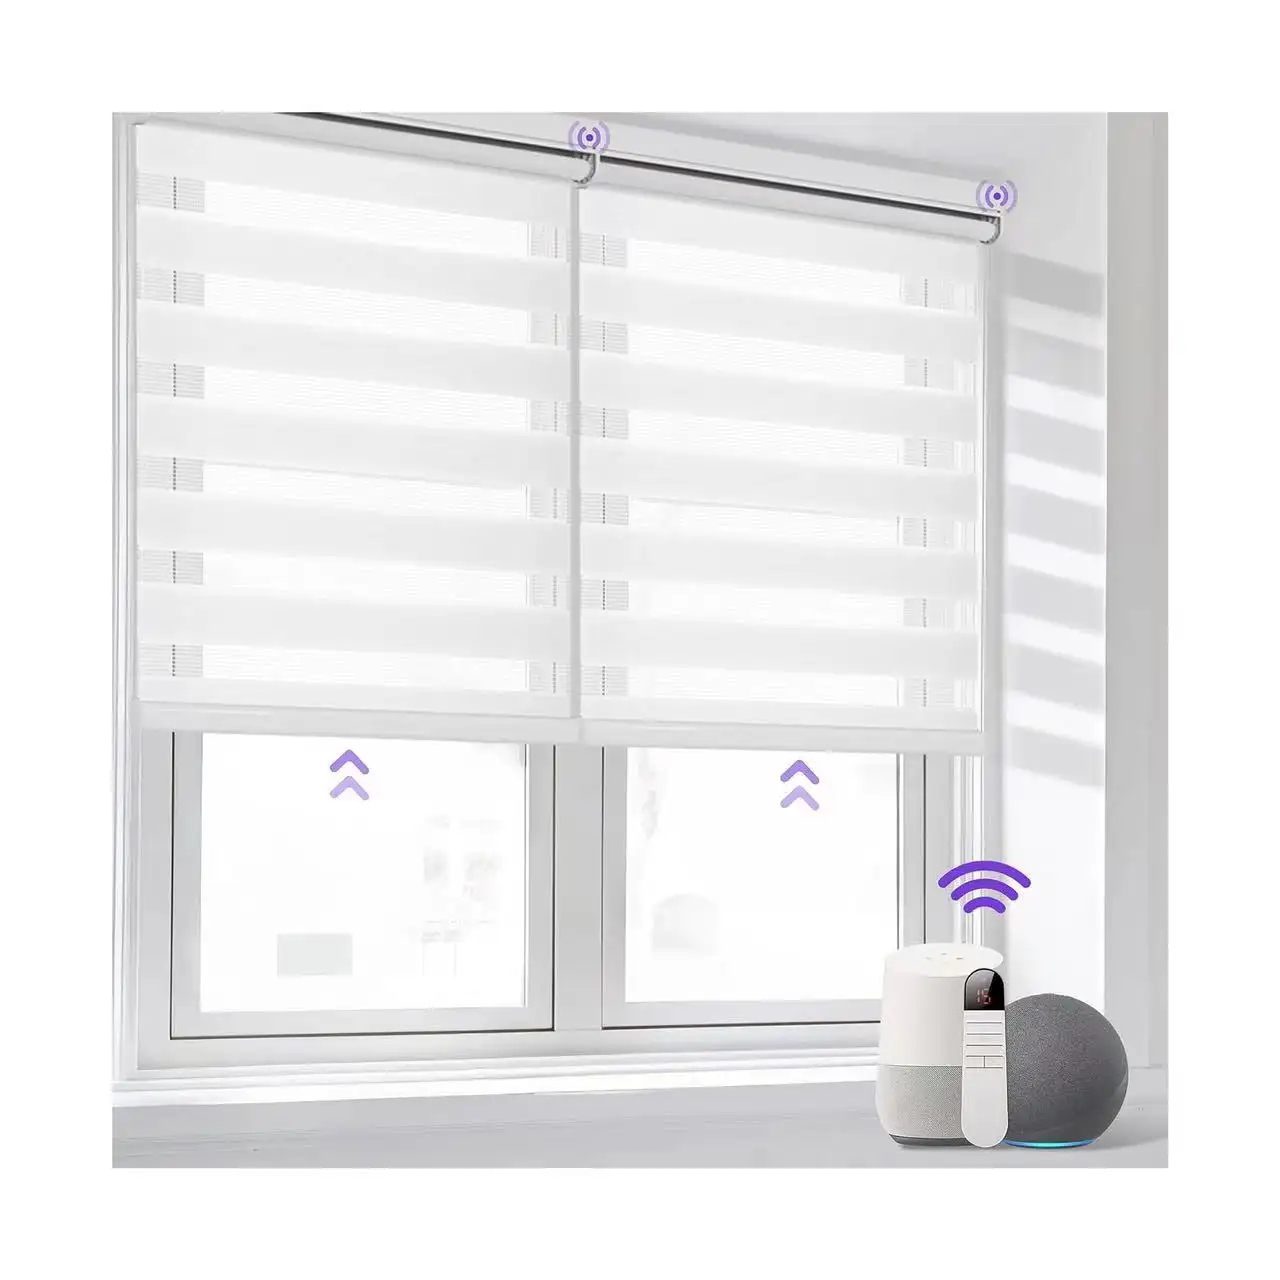 Factory direct sales smart blackout and waterproof electric zebra blinds for home decoration